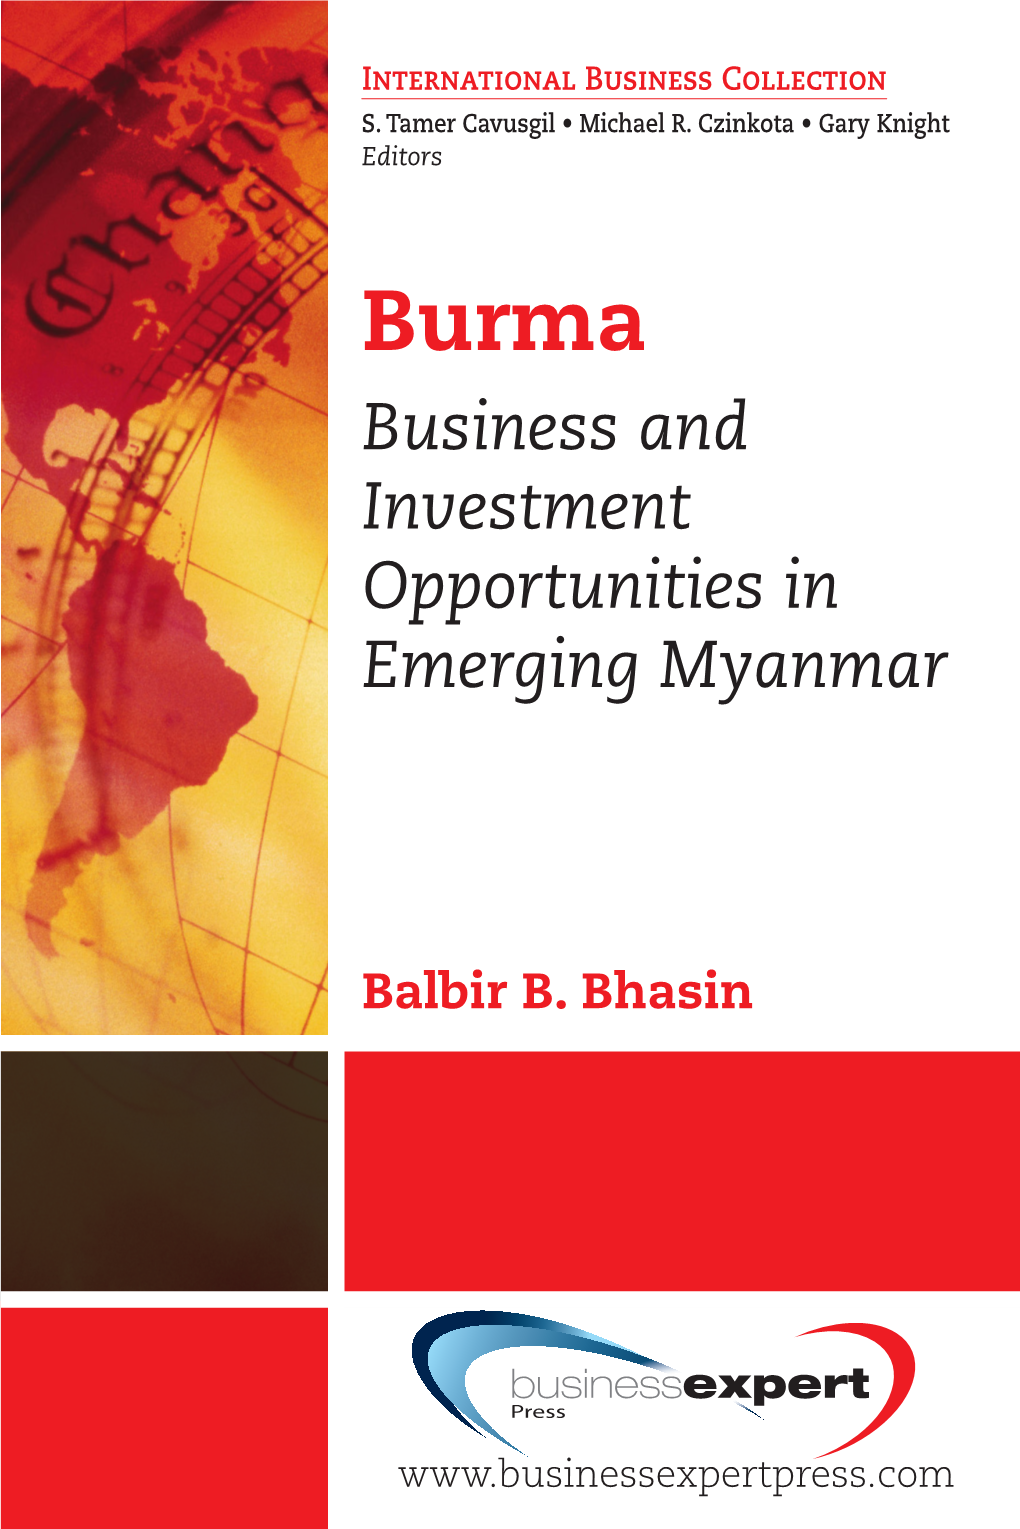 Burma: Business and Investment Opportunities in Emerging Myanmar Copyright © Business Expert Press, LLC, 2014